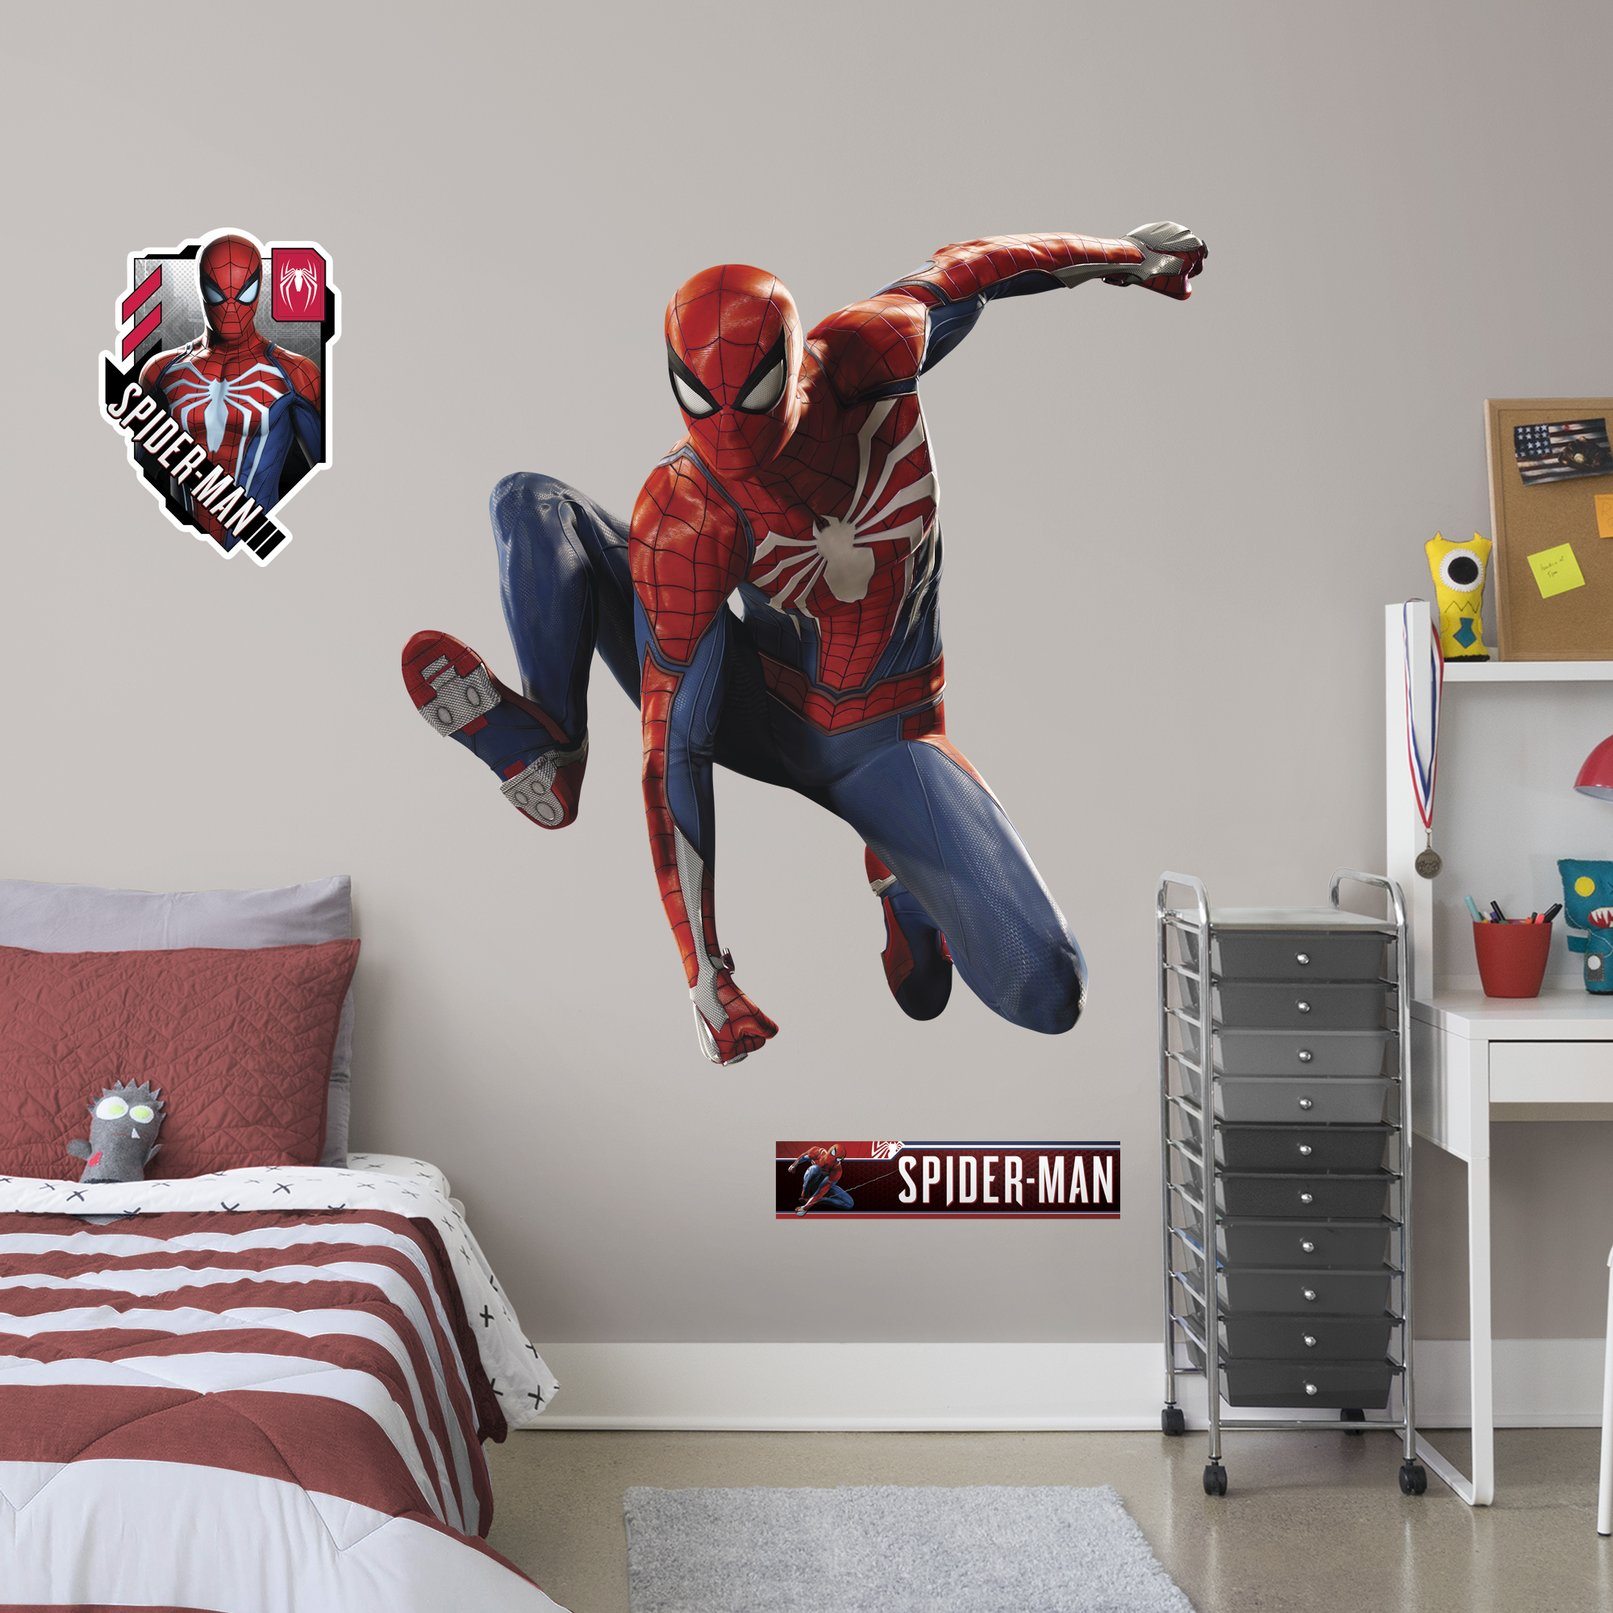 https://fathead.com/collections/superheroes/products/m1900-01419-001?variant=33244015493208